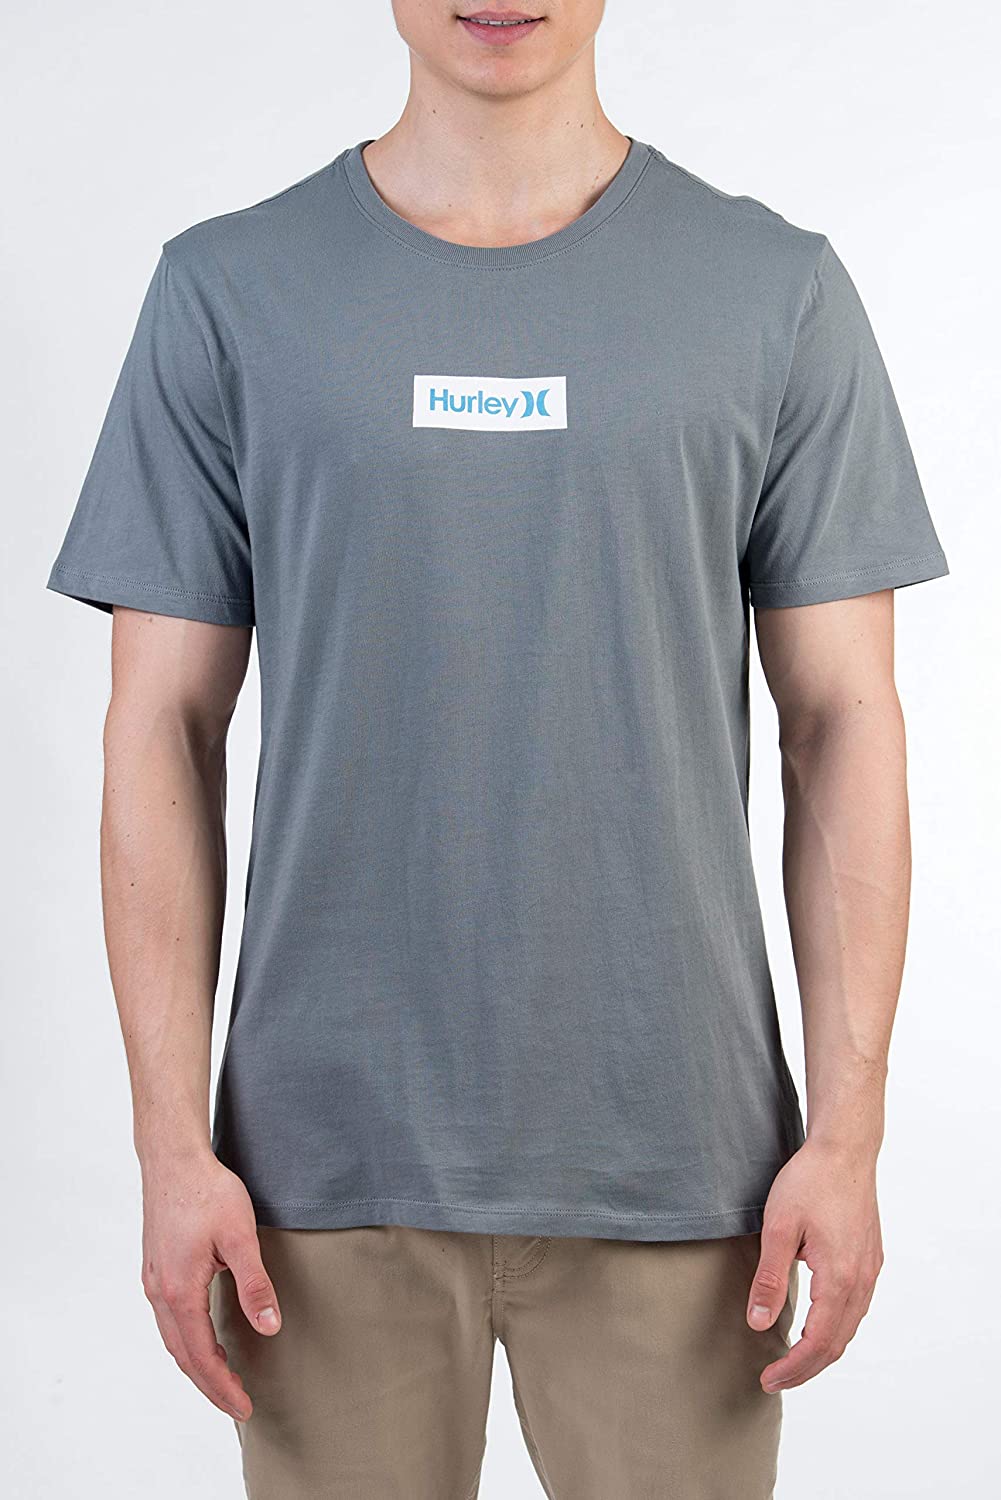 Hurley Men's Premium One and Only Boxed Logo T-Shirt